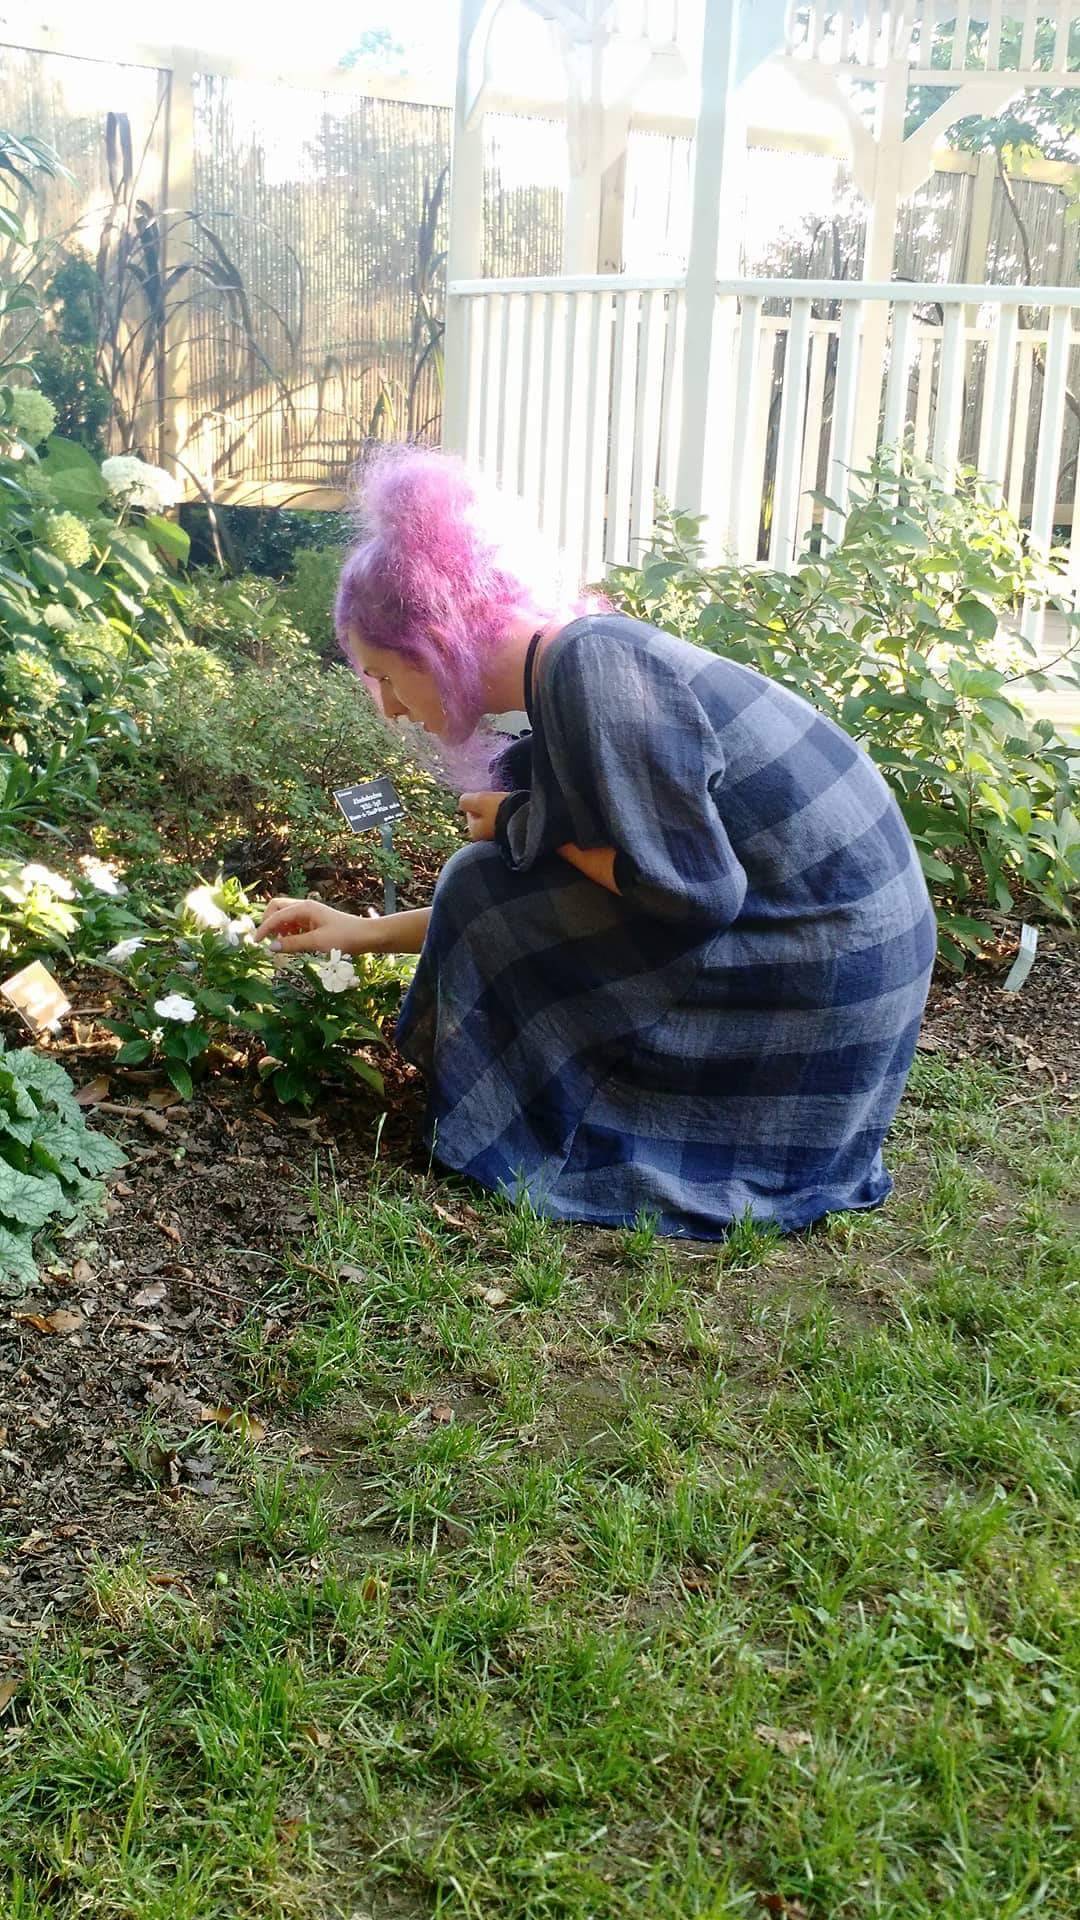 trans-witch-lexi: I was being all plant-witchy yesterday!   I went to an arboretum